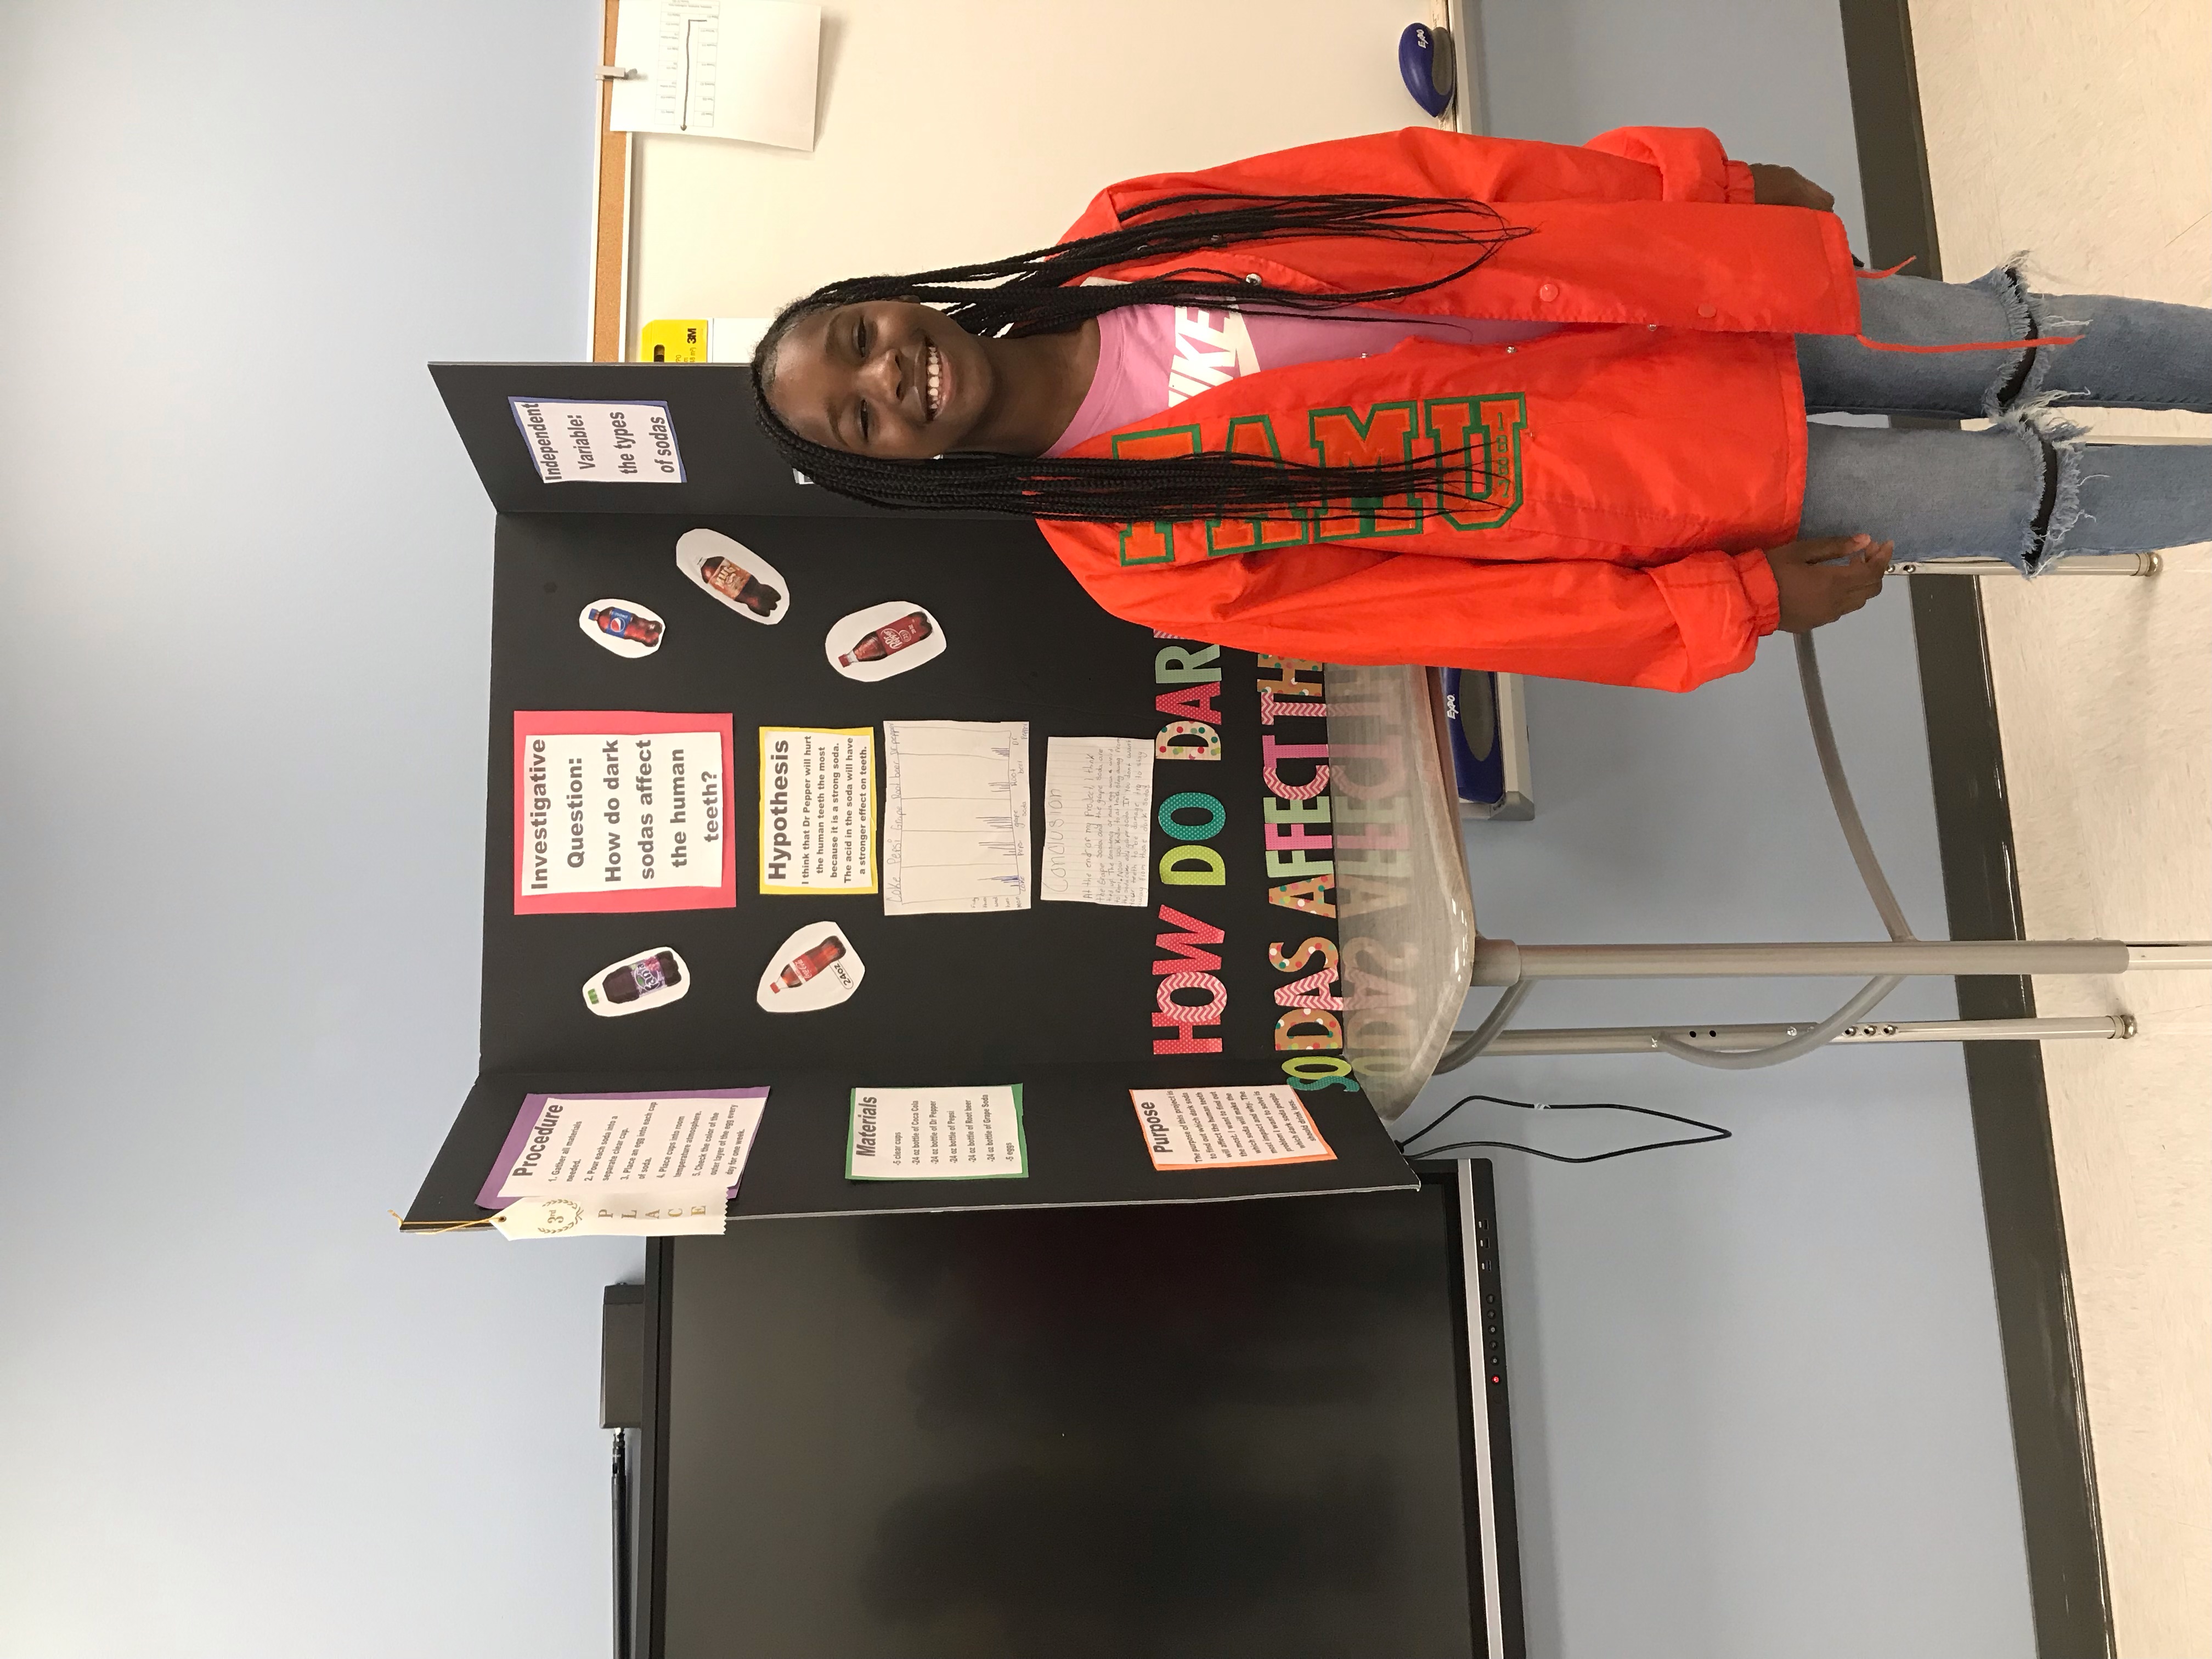 Zoey Lester science fair project